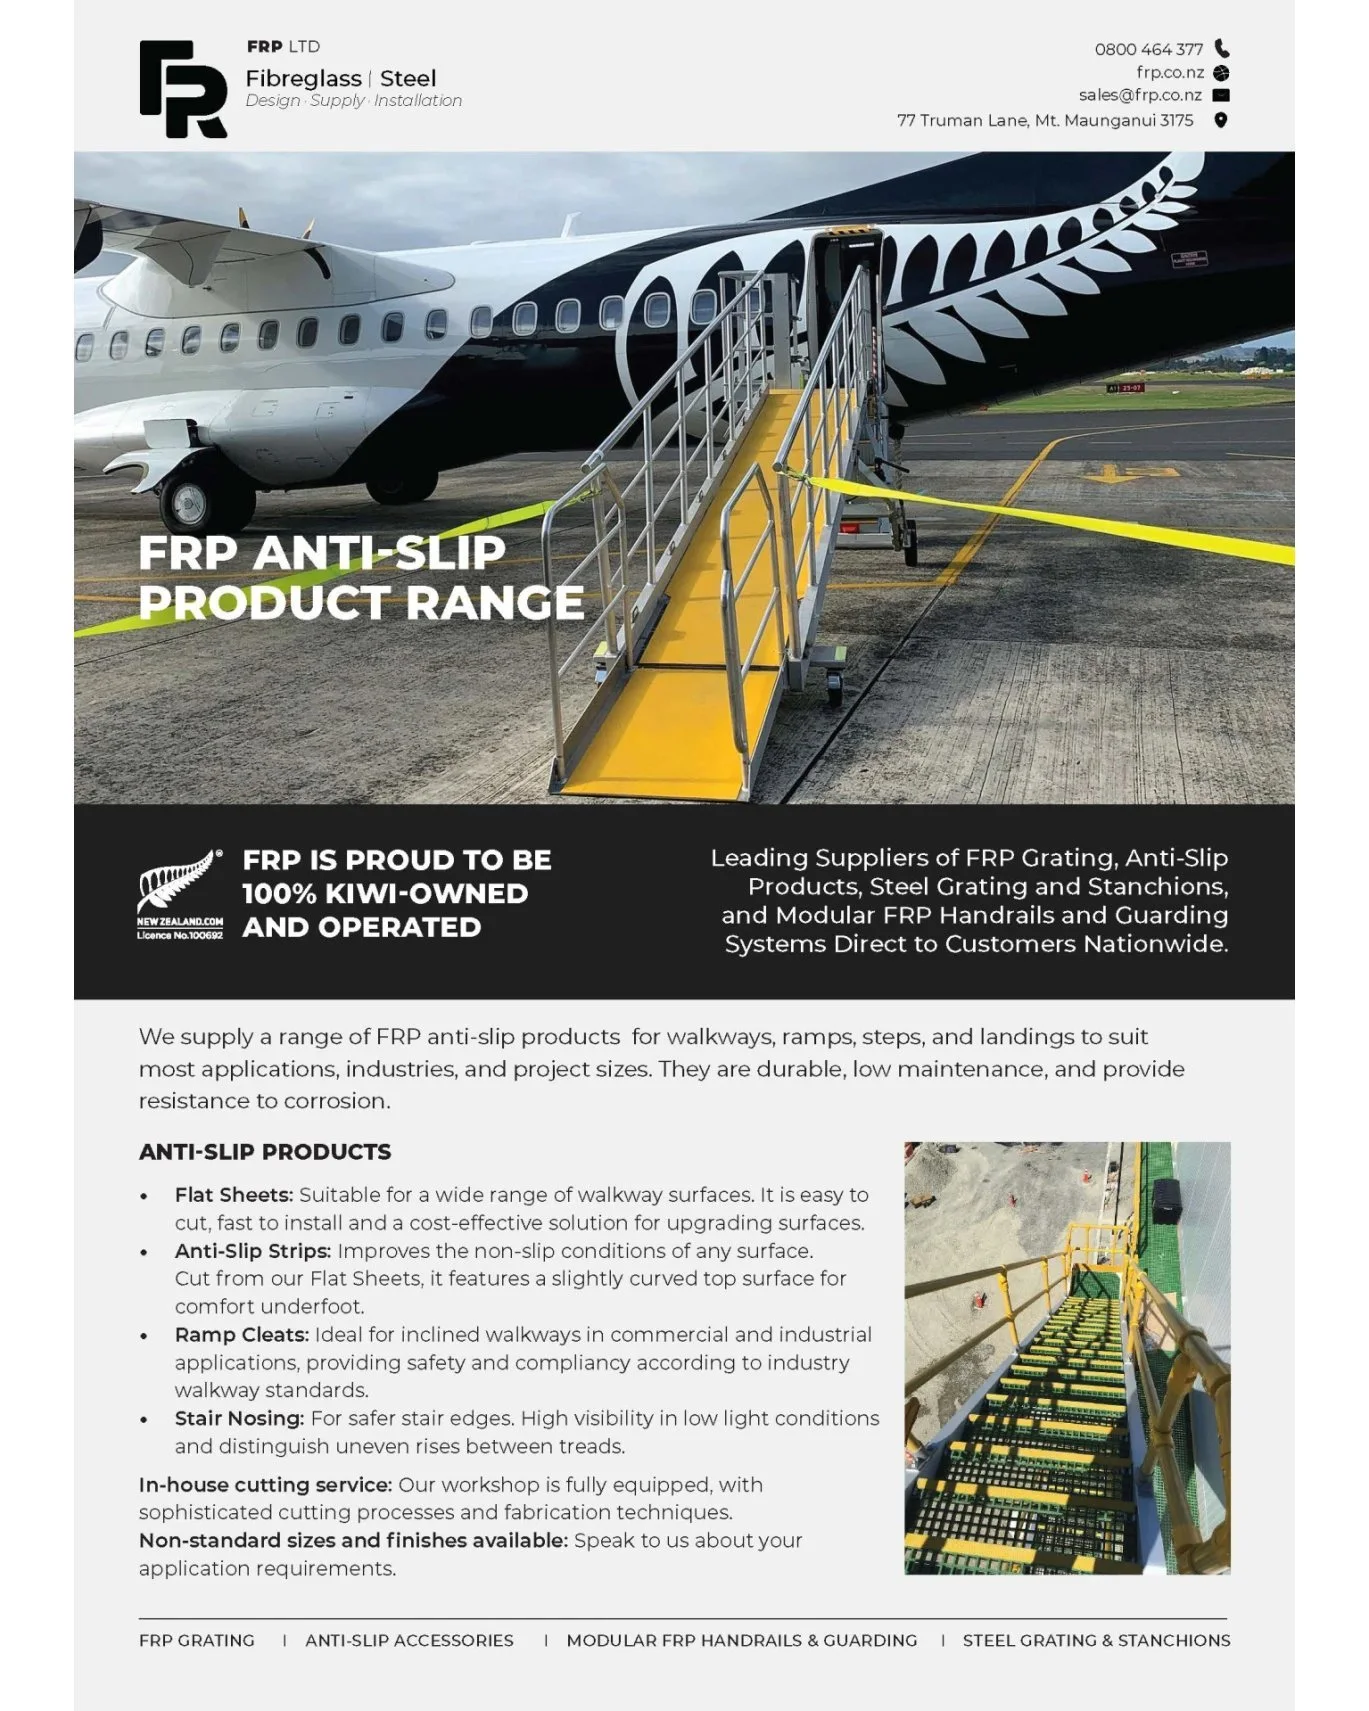 We have a range of anti-slip products to suit most industries.

#frp #frpproducts #nonslip #antislip #safety #nzconstruction #nzarchitects #walkways #ramps #stairs #industrial #commercial